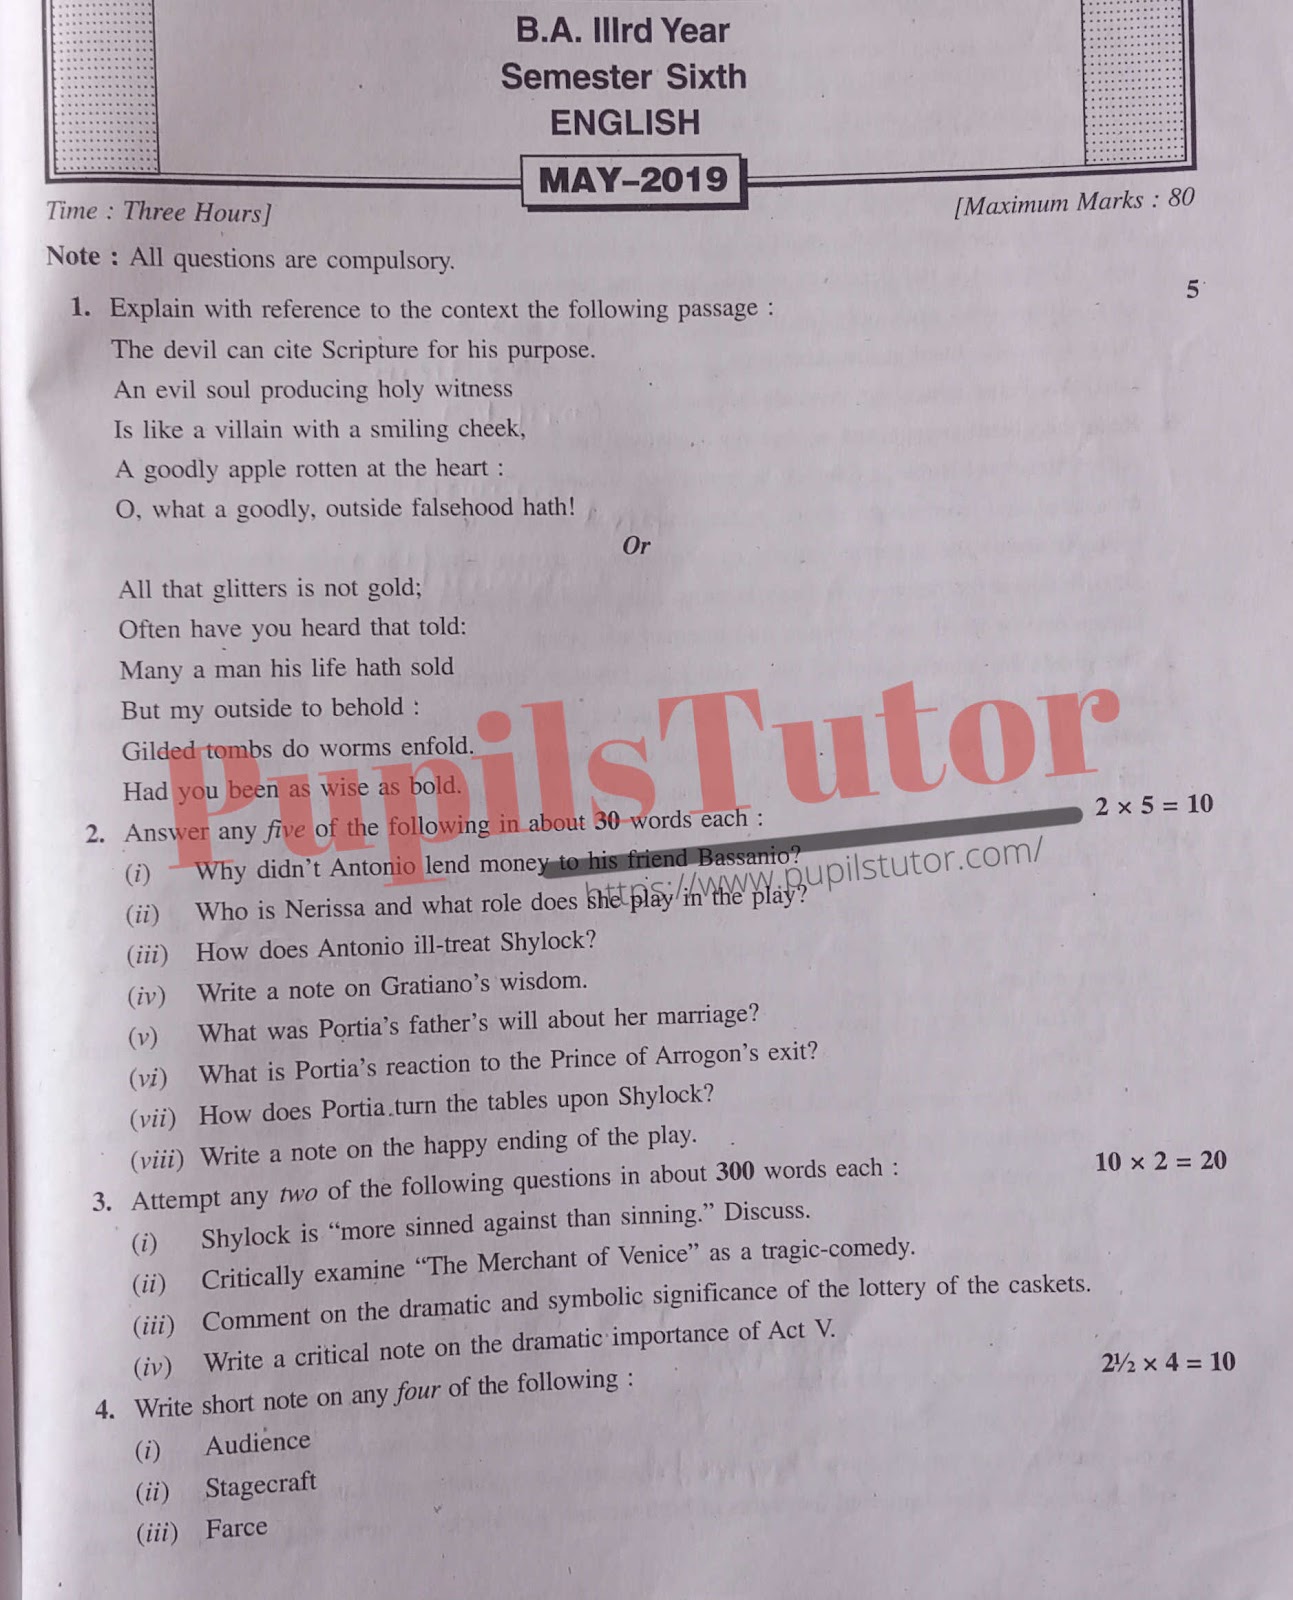 CDLU (Chaudhary Devi Lal University, Sirsa Haryana) BA Semester Exam Sixth Semester Previous Year English Question Paper For May, 2019 Exam (Question Paper Page 1) - pupilstutor.com